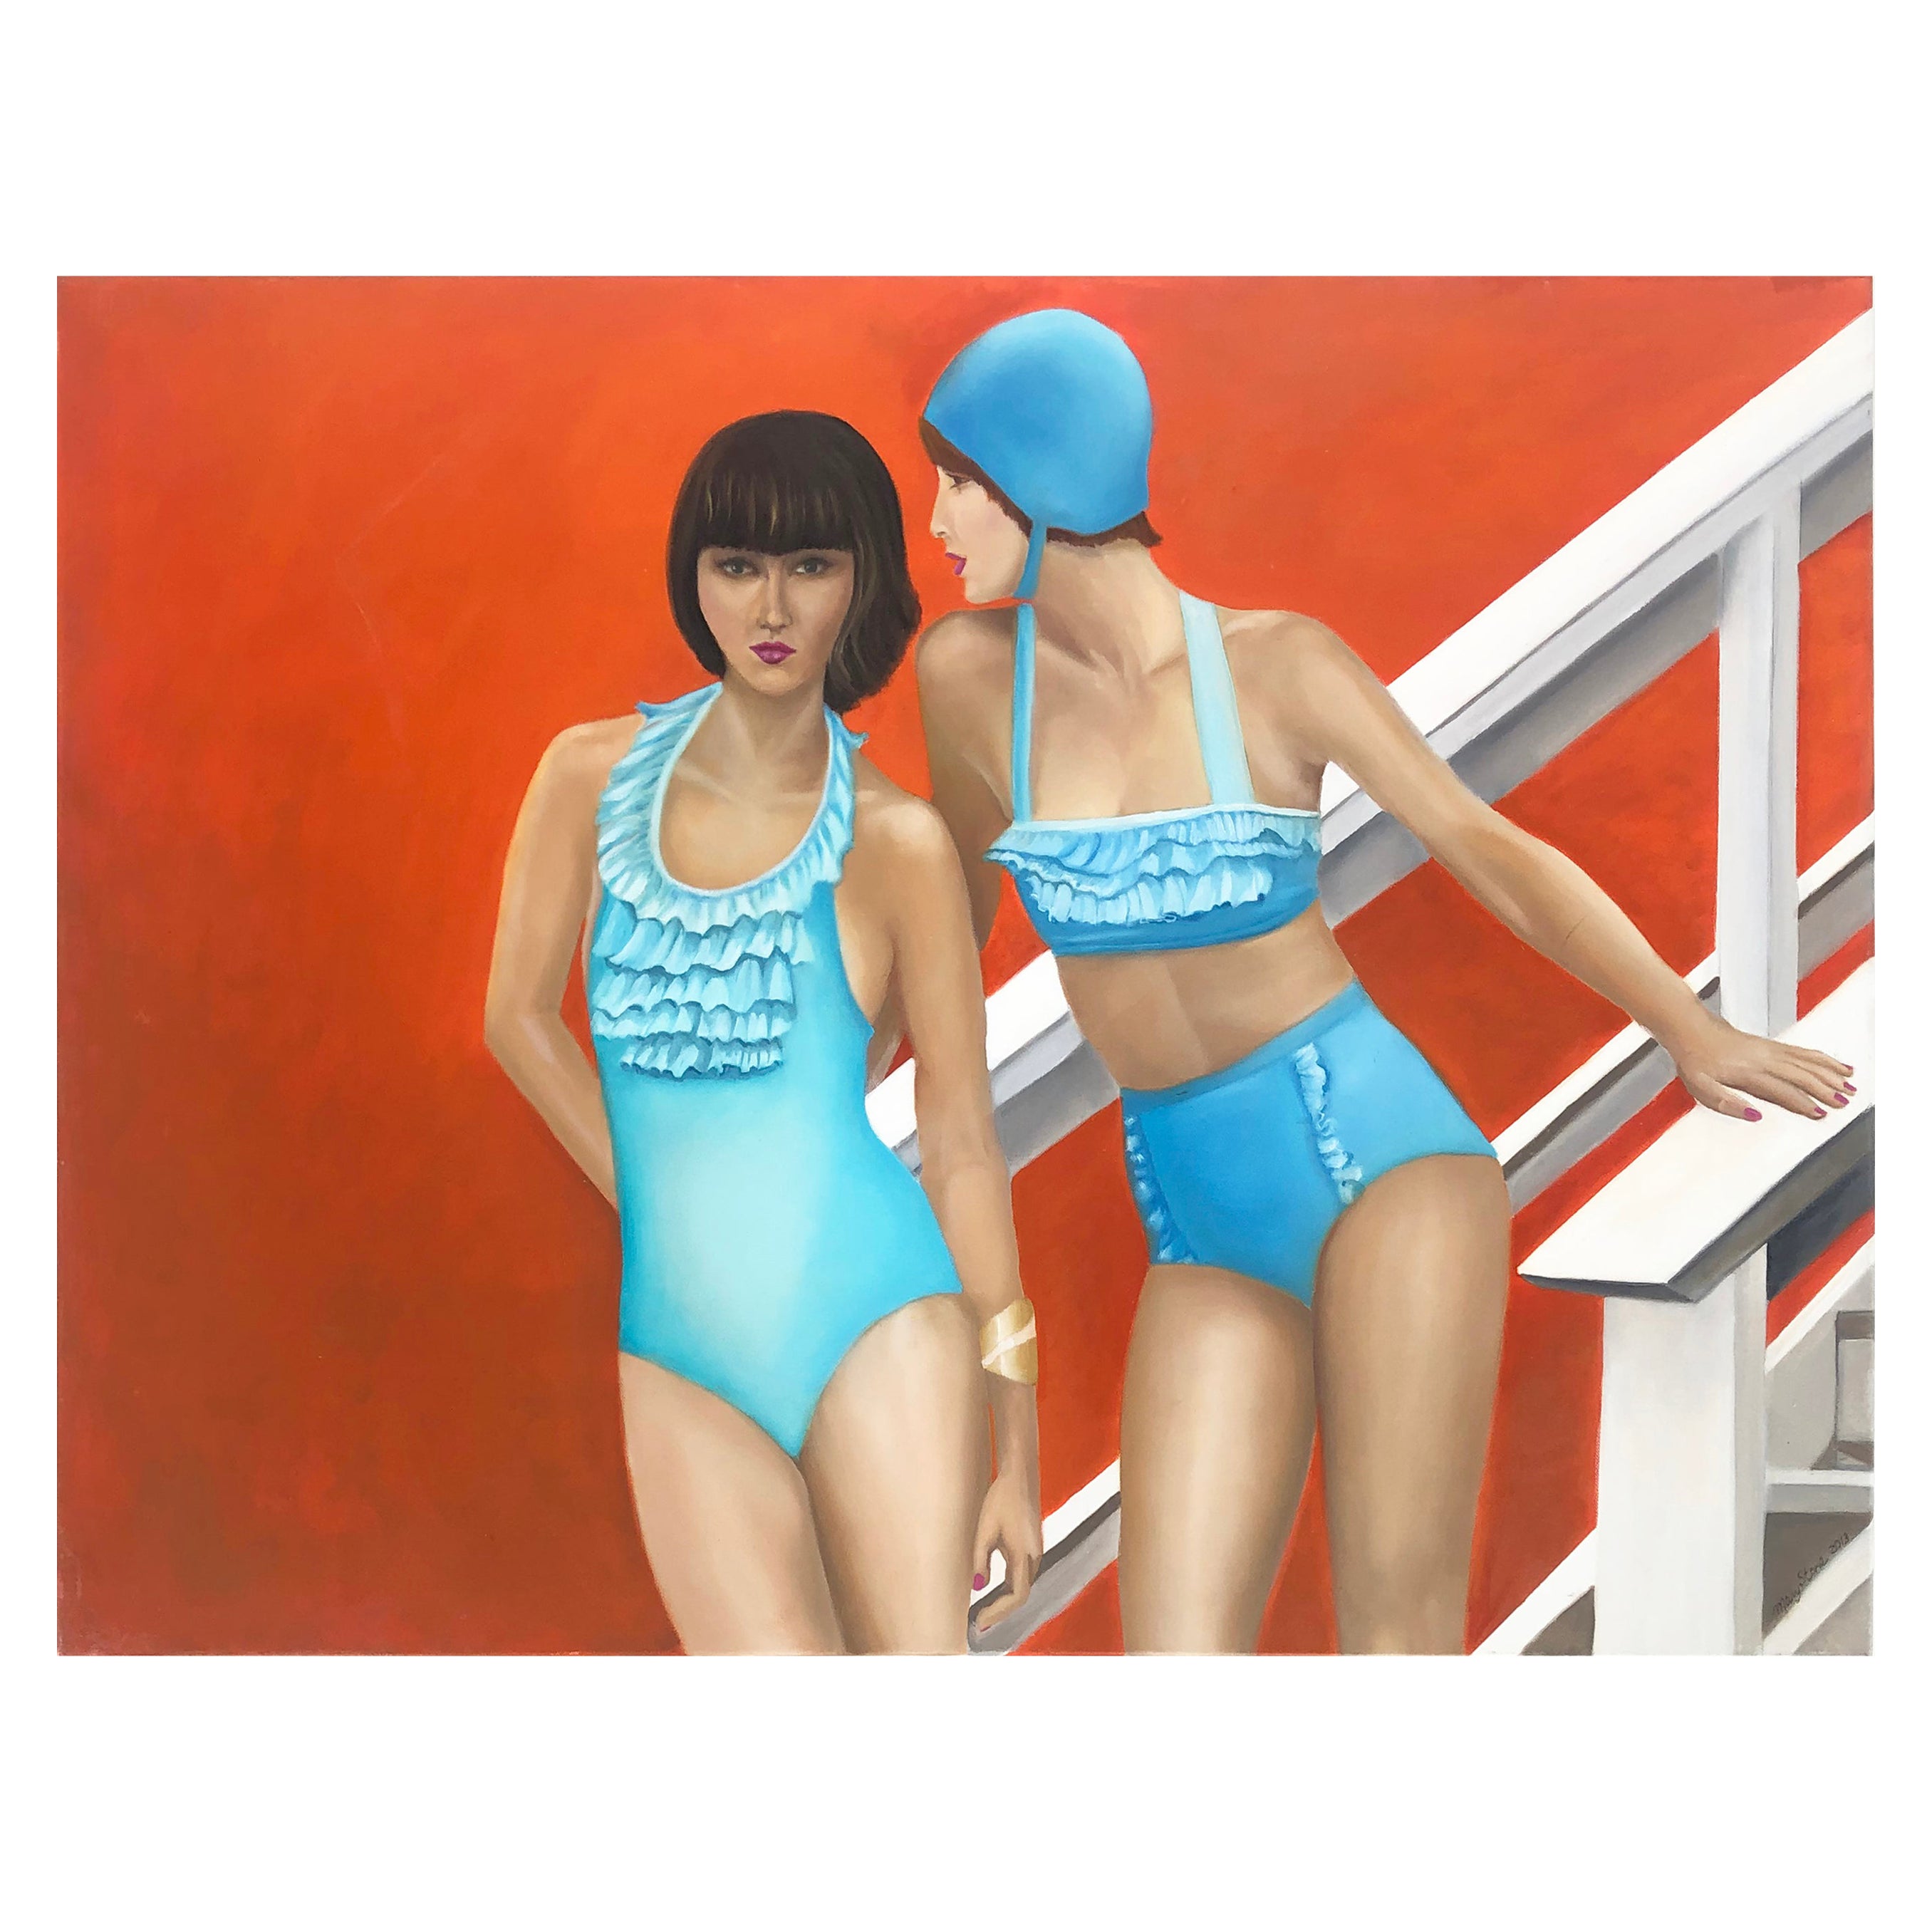 Original Oil Painting on Canvas "Blue Bathers" by Mary Stone